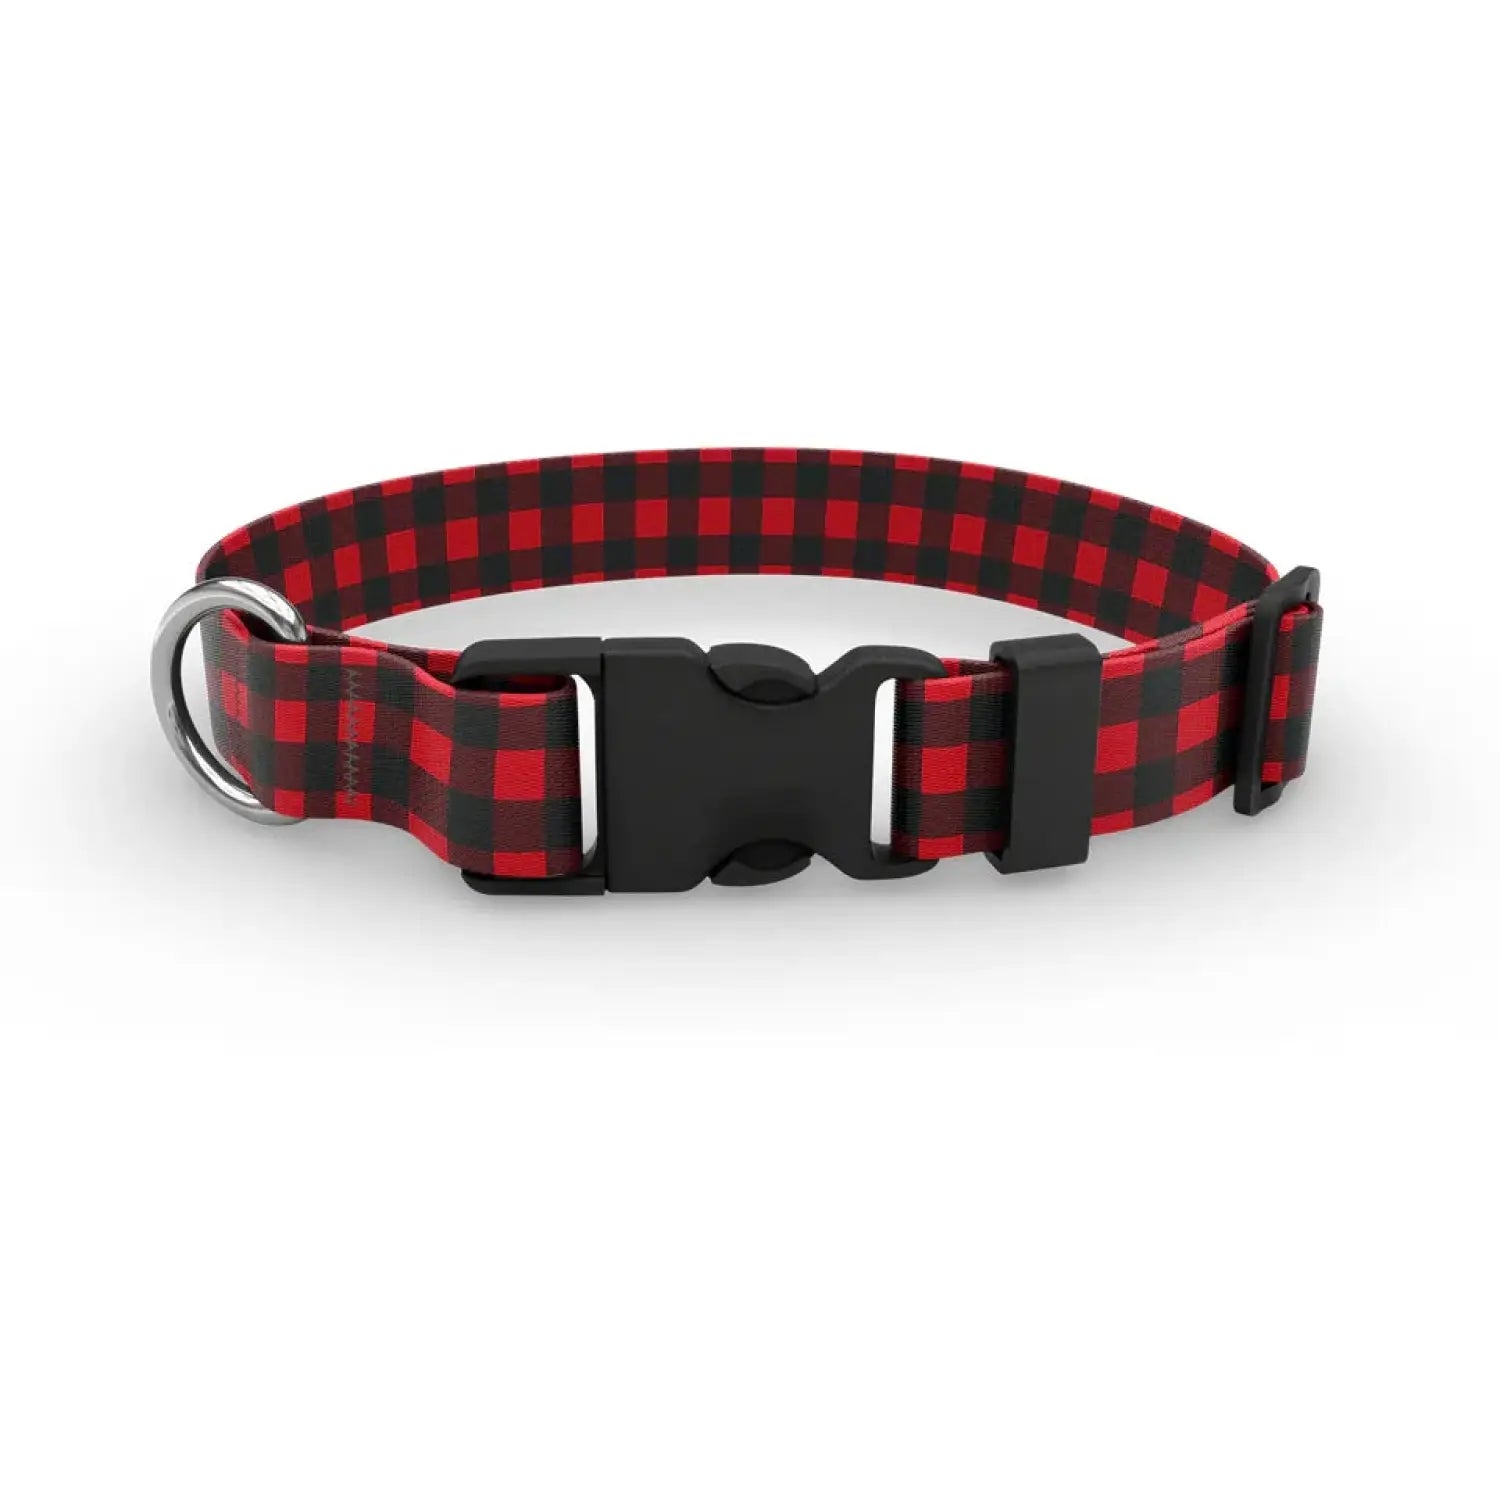 Wingo Outdoors Dog Collar in Buffalo Check design, black and red check plaid.  With black buckle and silver D ring.